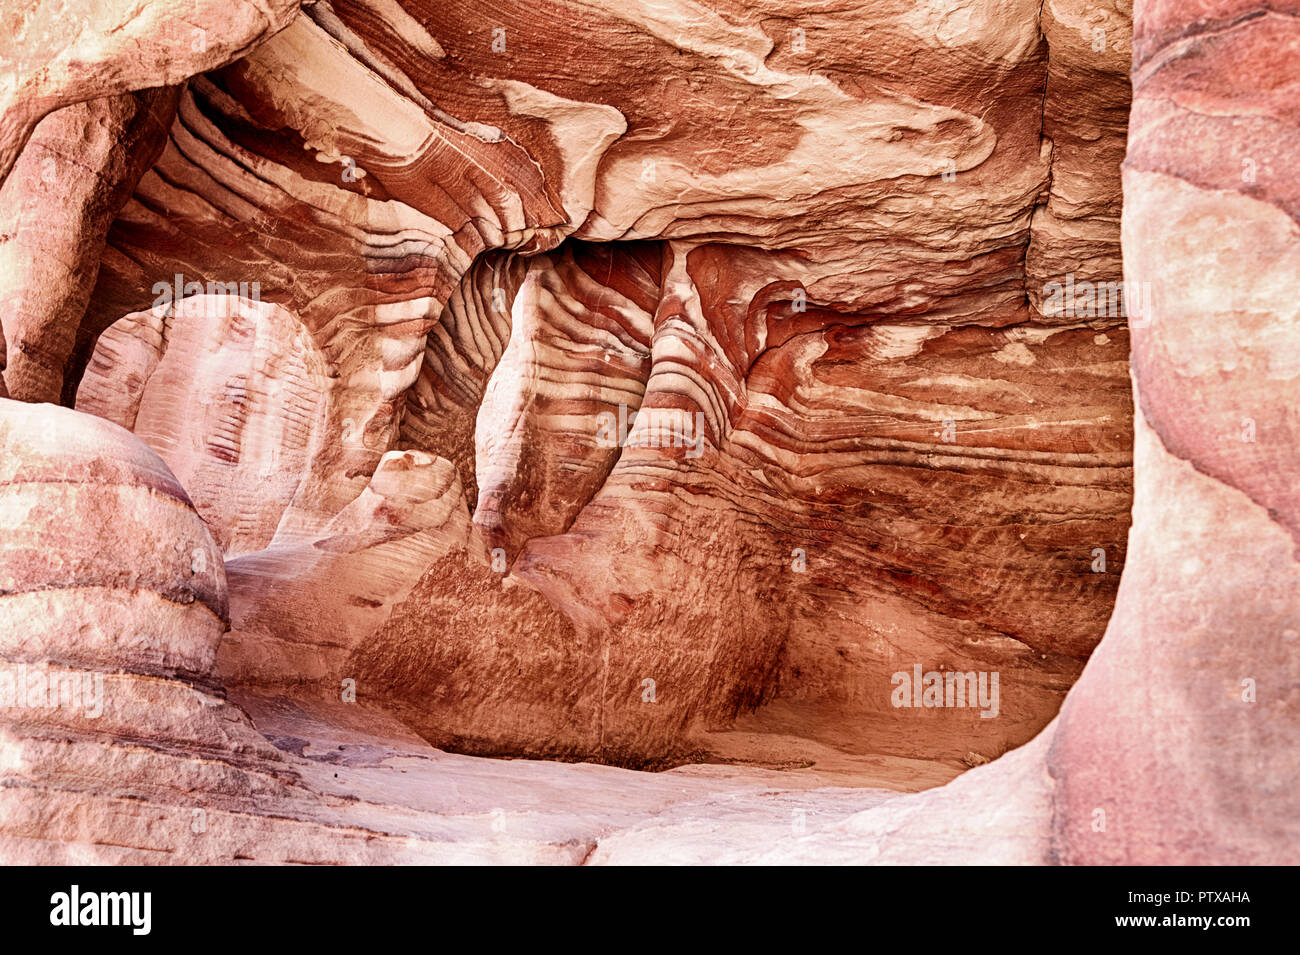 A view inside one of the burial chambers of Petra that shows the beautiful red rock striations of the sandstone in that part of Jordan. Stock Photo